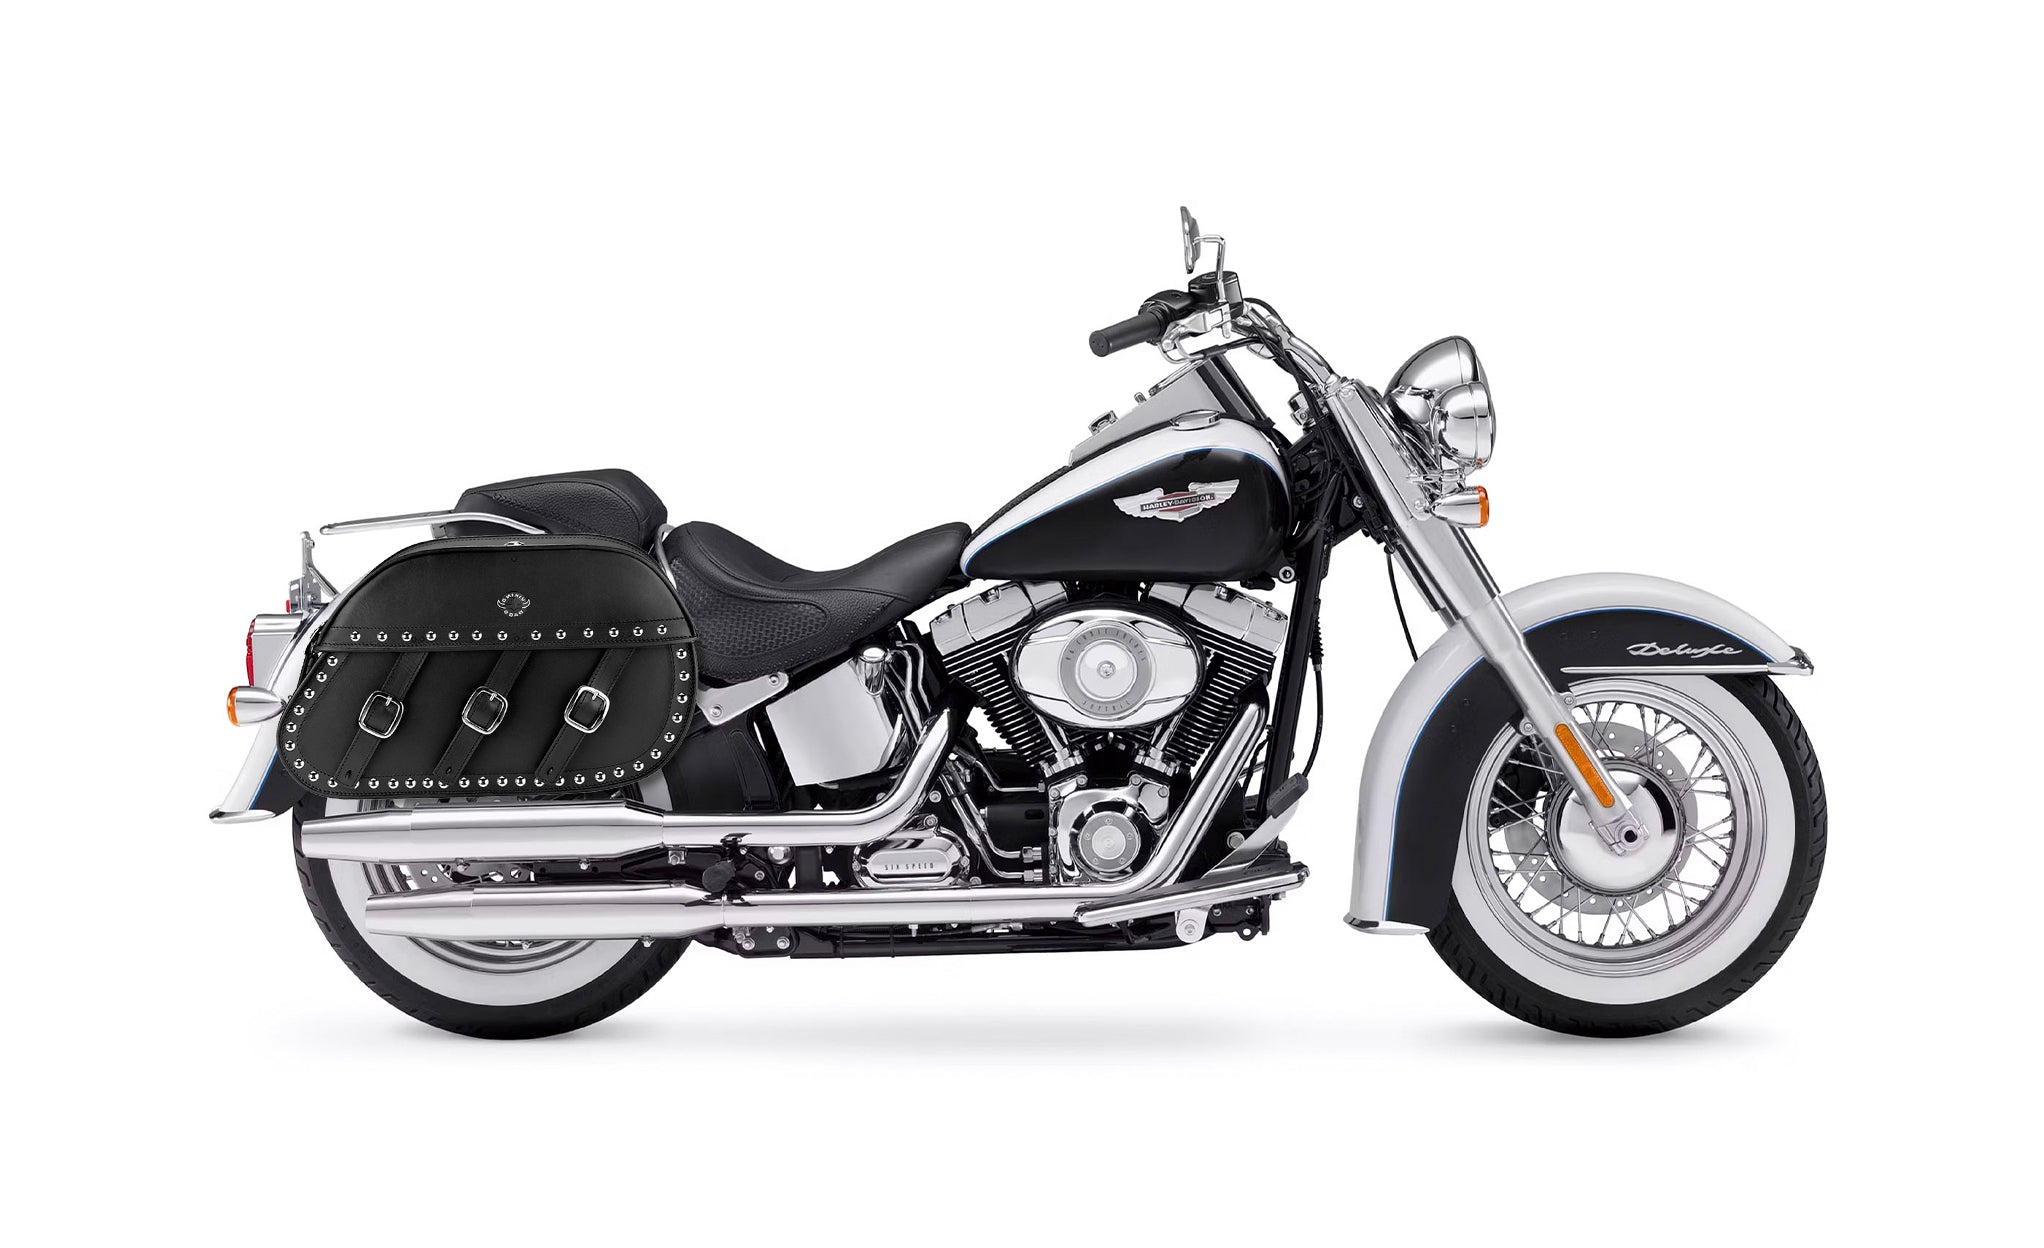 34L - Trianon Extra Large Studded Leather Motorcycle Saddlebags for Harley Softail Deluxe FLSTN/I on Bike Photo @expand